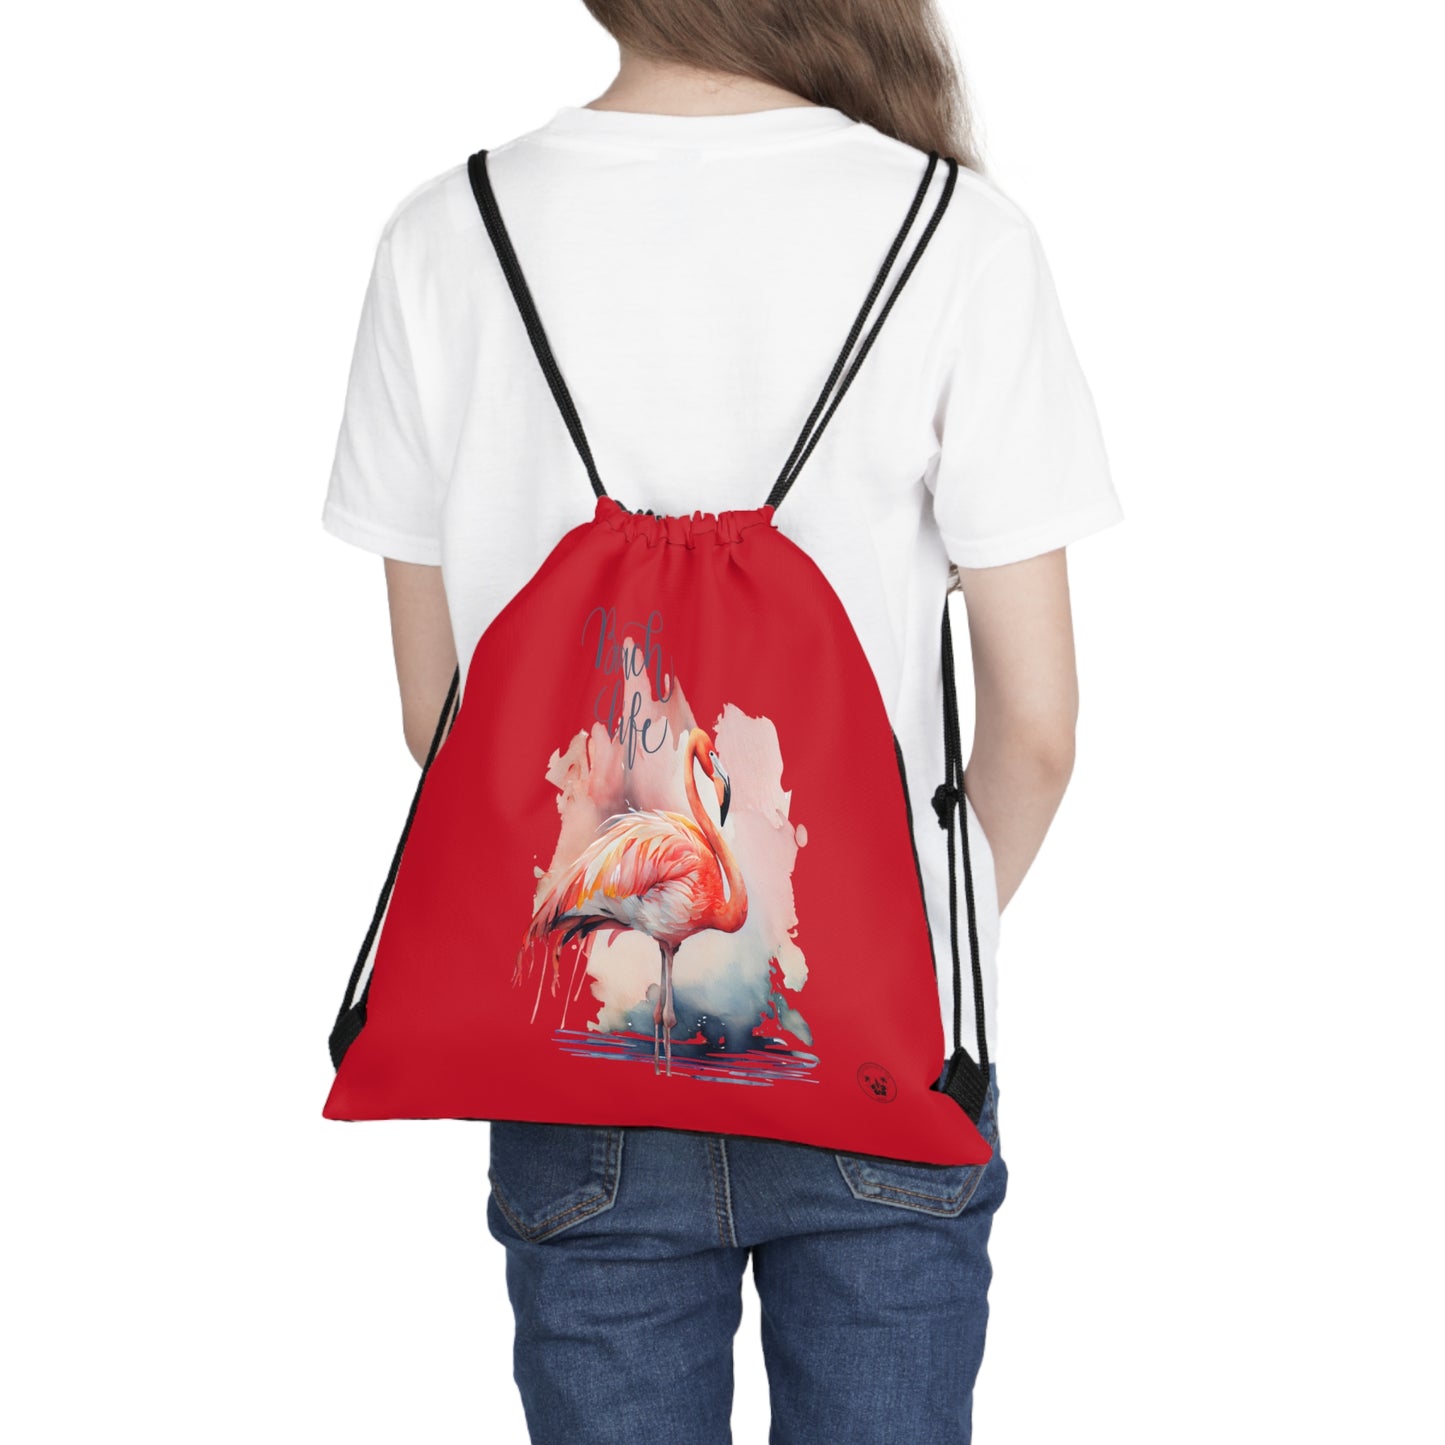 Unleash your wanderlust with our versatile drawstring backpack! Embrace travel with ease and style, flaunting a Beach Life Flamingo graphic with bright color backgrounds. This one is a red background. Designed for adventurers, it's the perfect blend of practicality and fashion. Get yours today for your next adventure! This is a front view of the backpack on the back of a model.